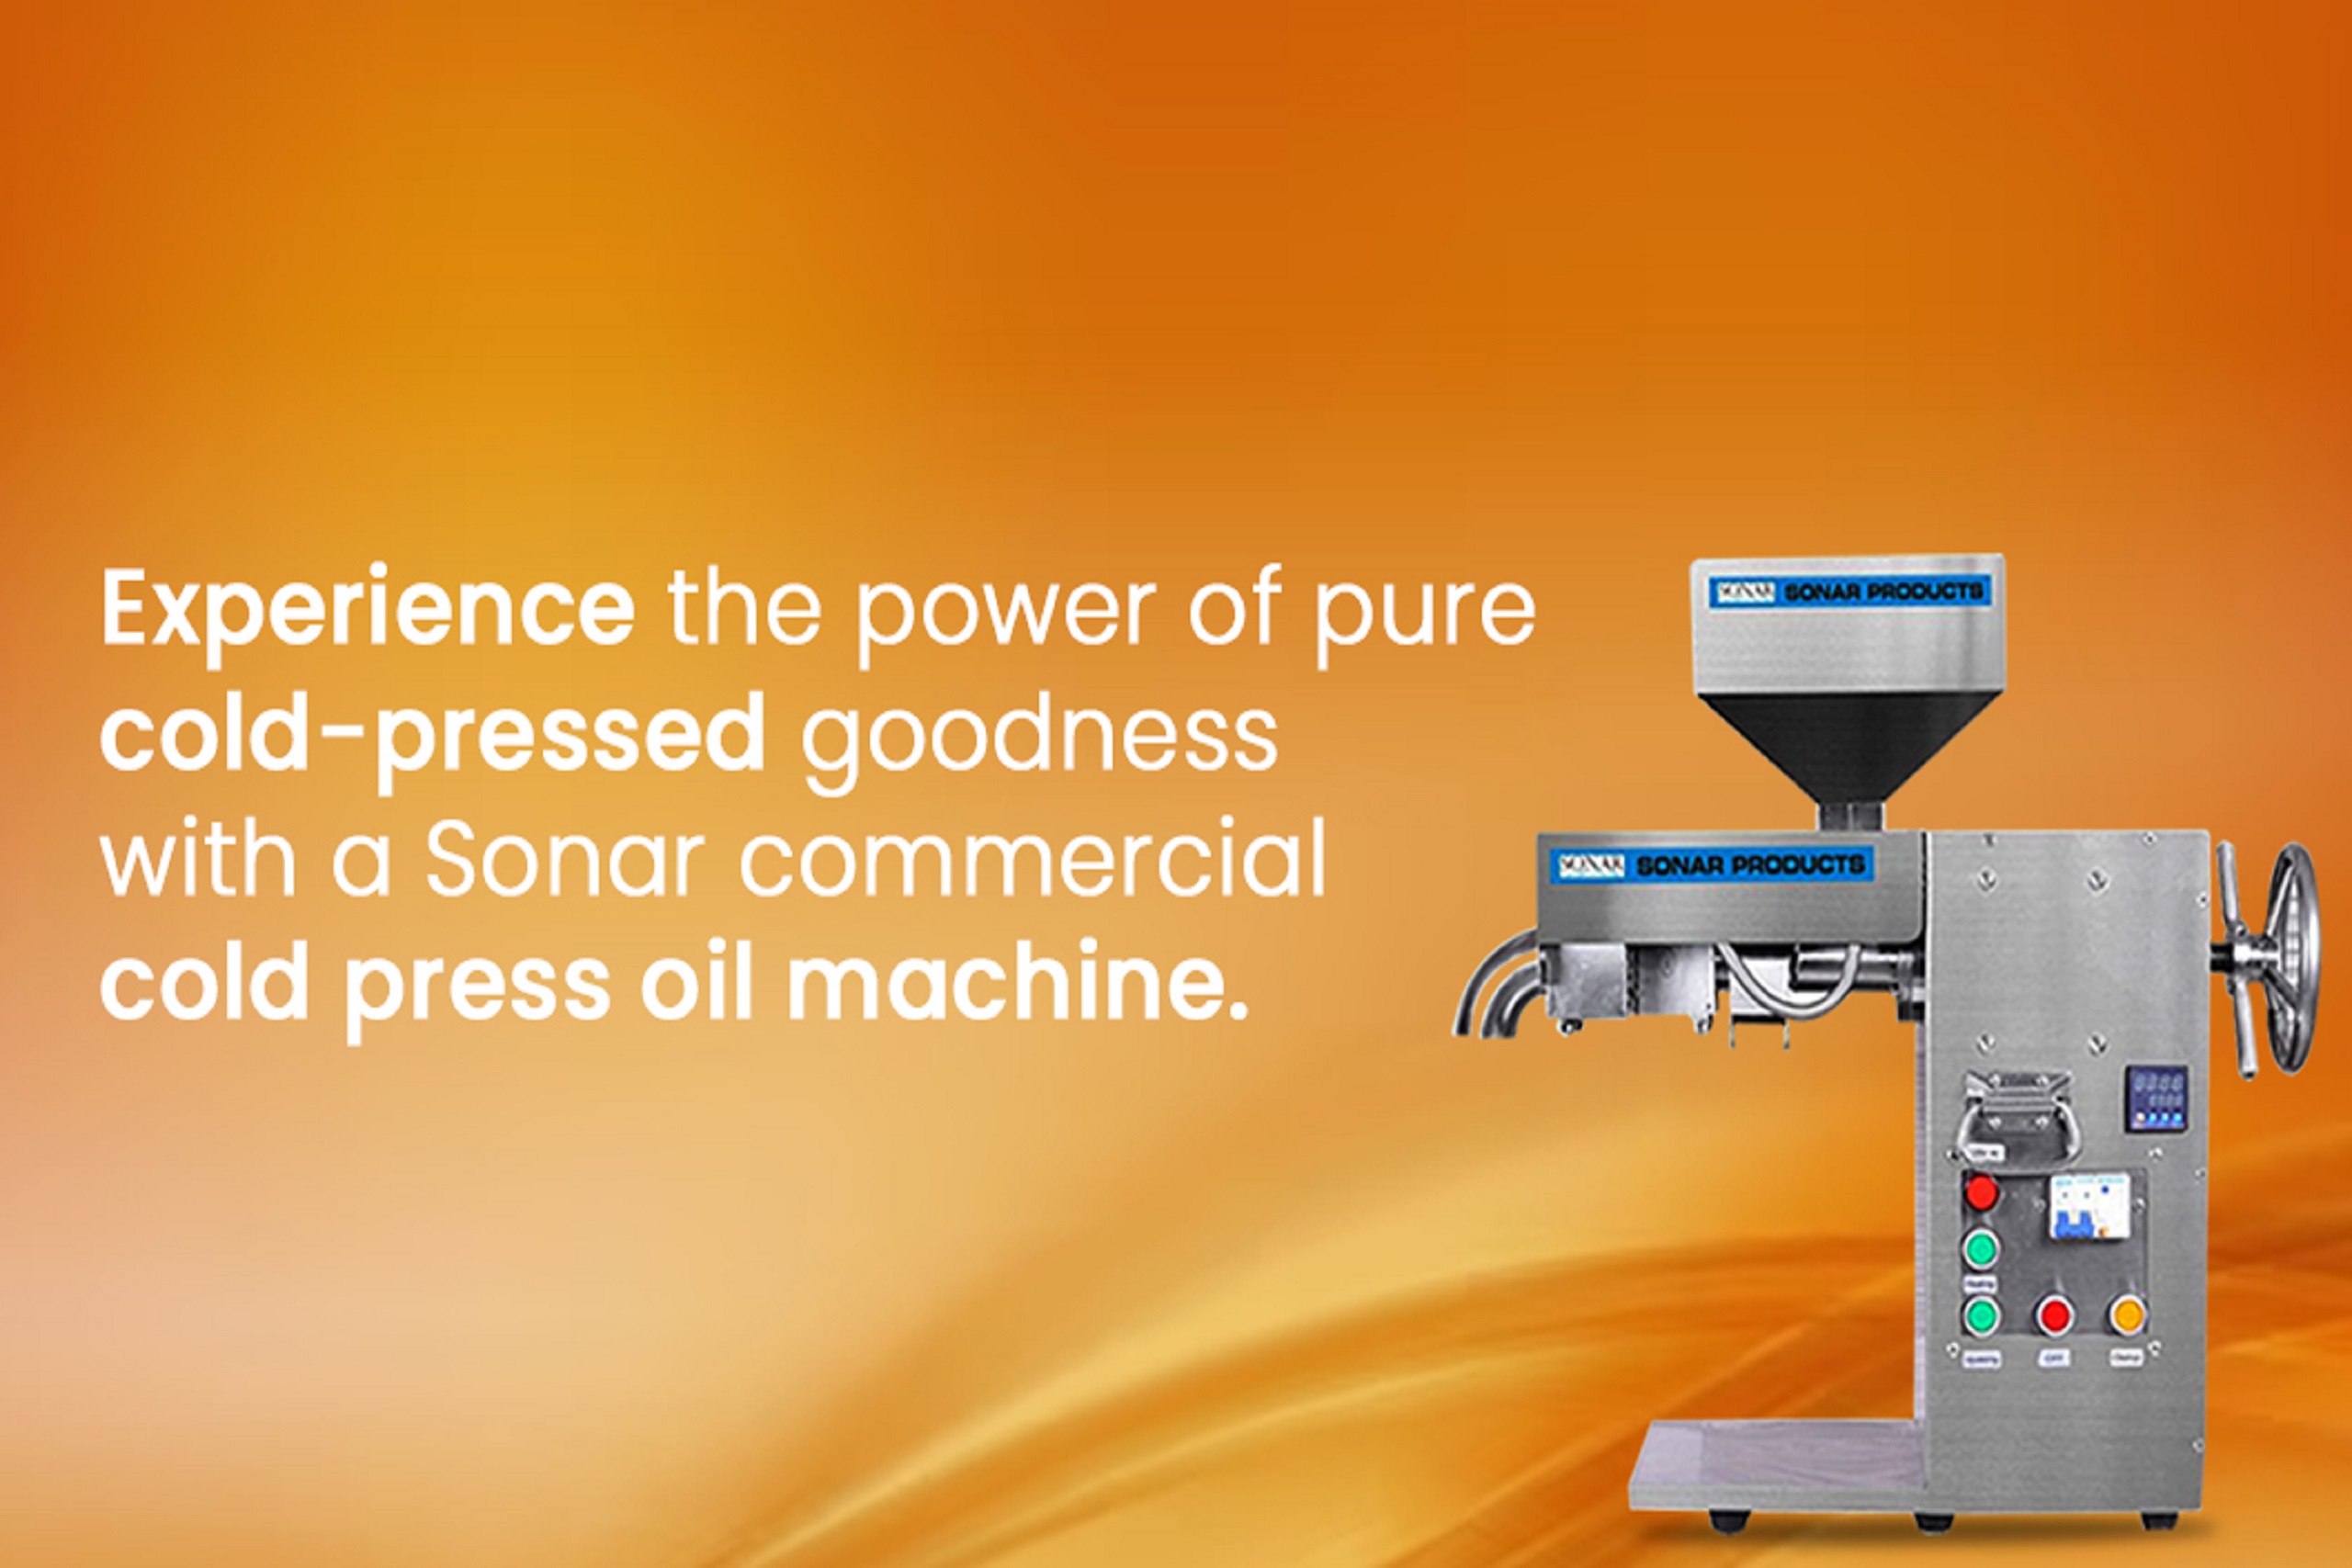 Experience the power of pure, cold-pressed goodness with a Sonar commercial cold press oil machine.